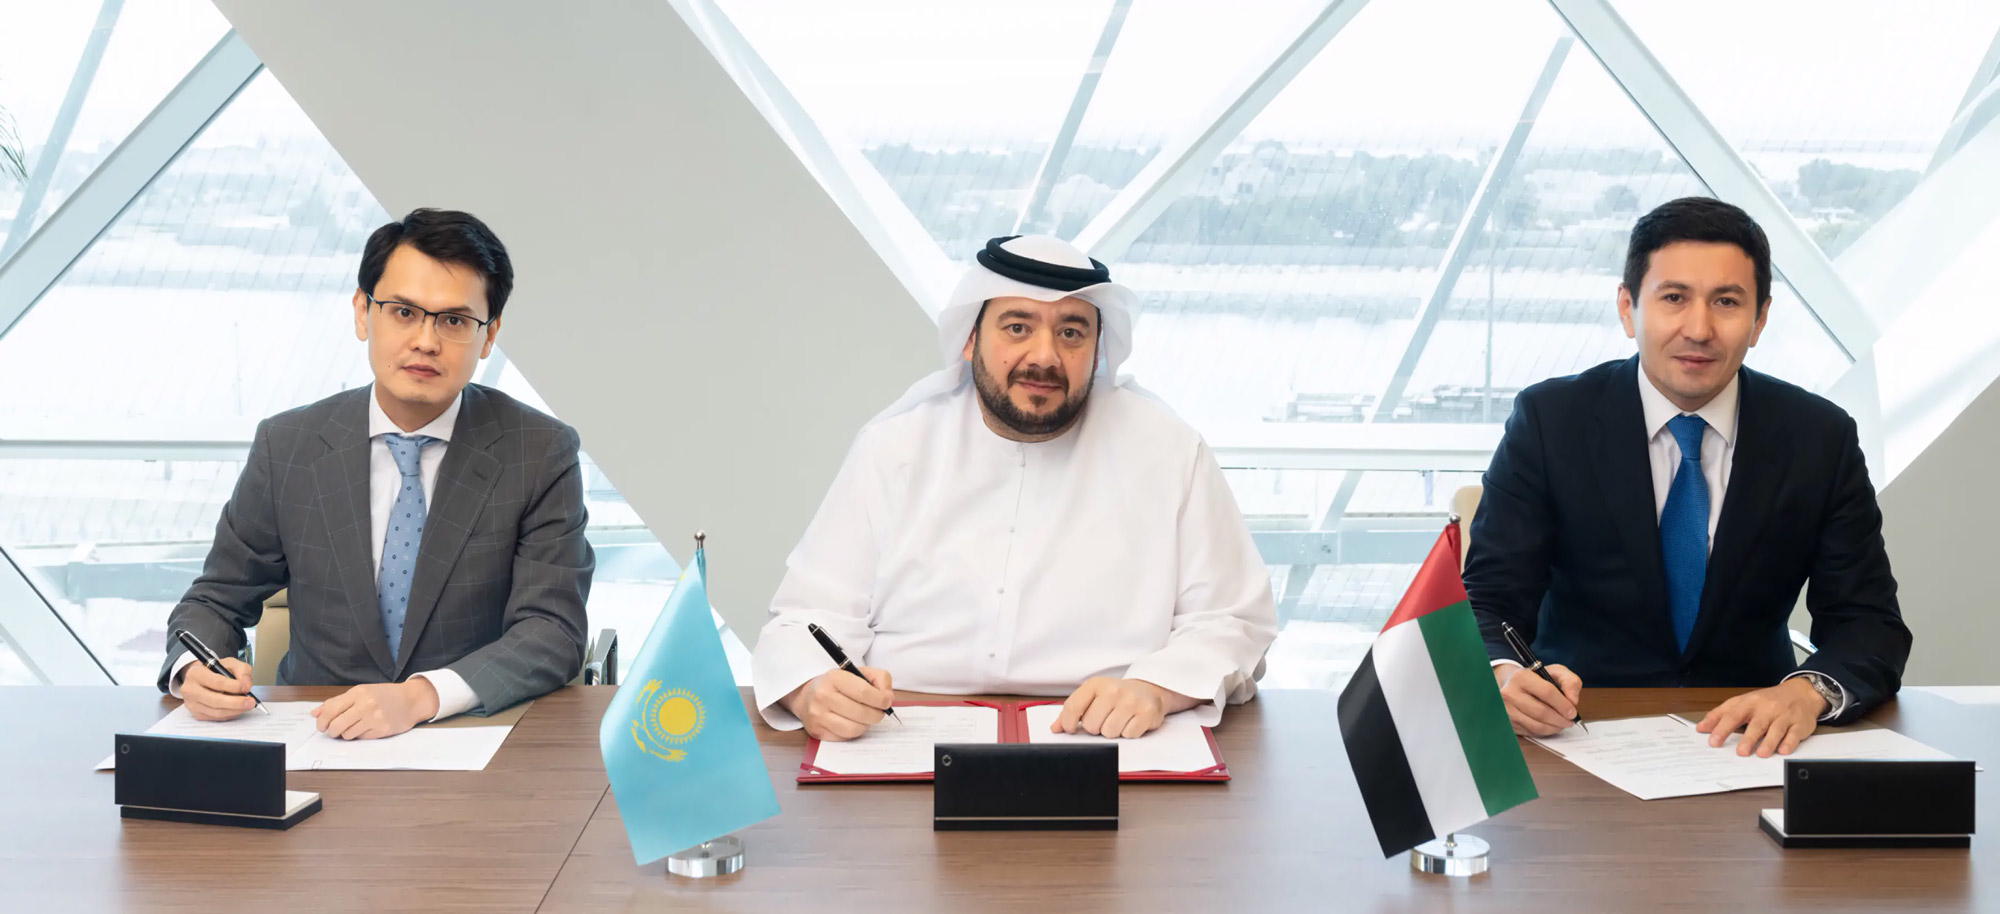 UAE and Kazakhstan sign agreement on investment cooperation in data center and artificial intelligence projects